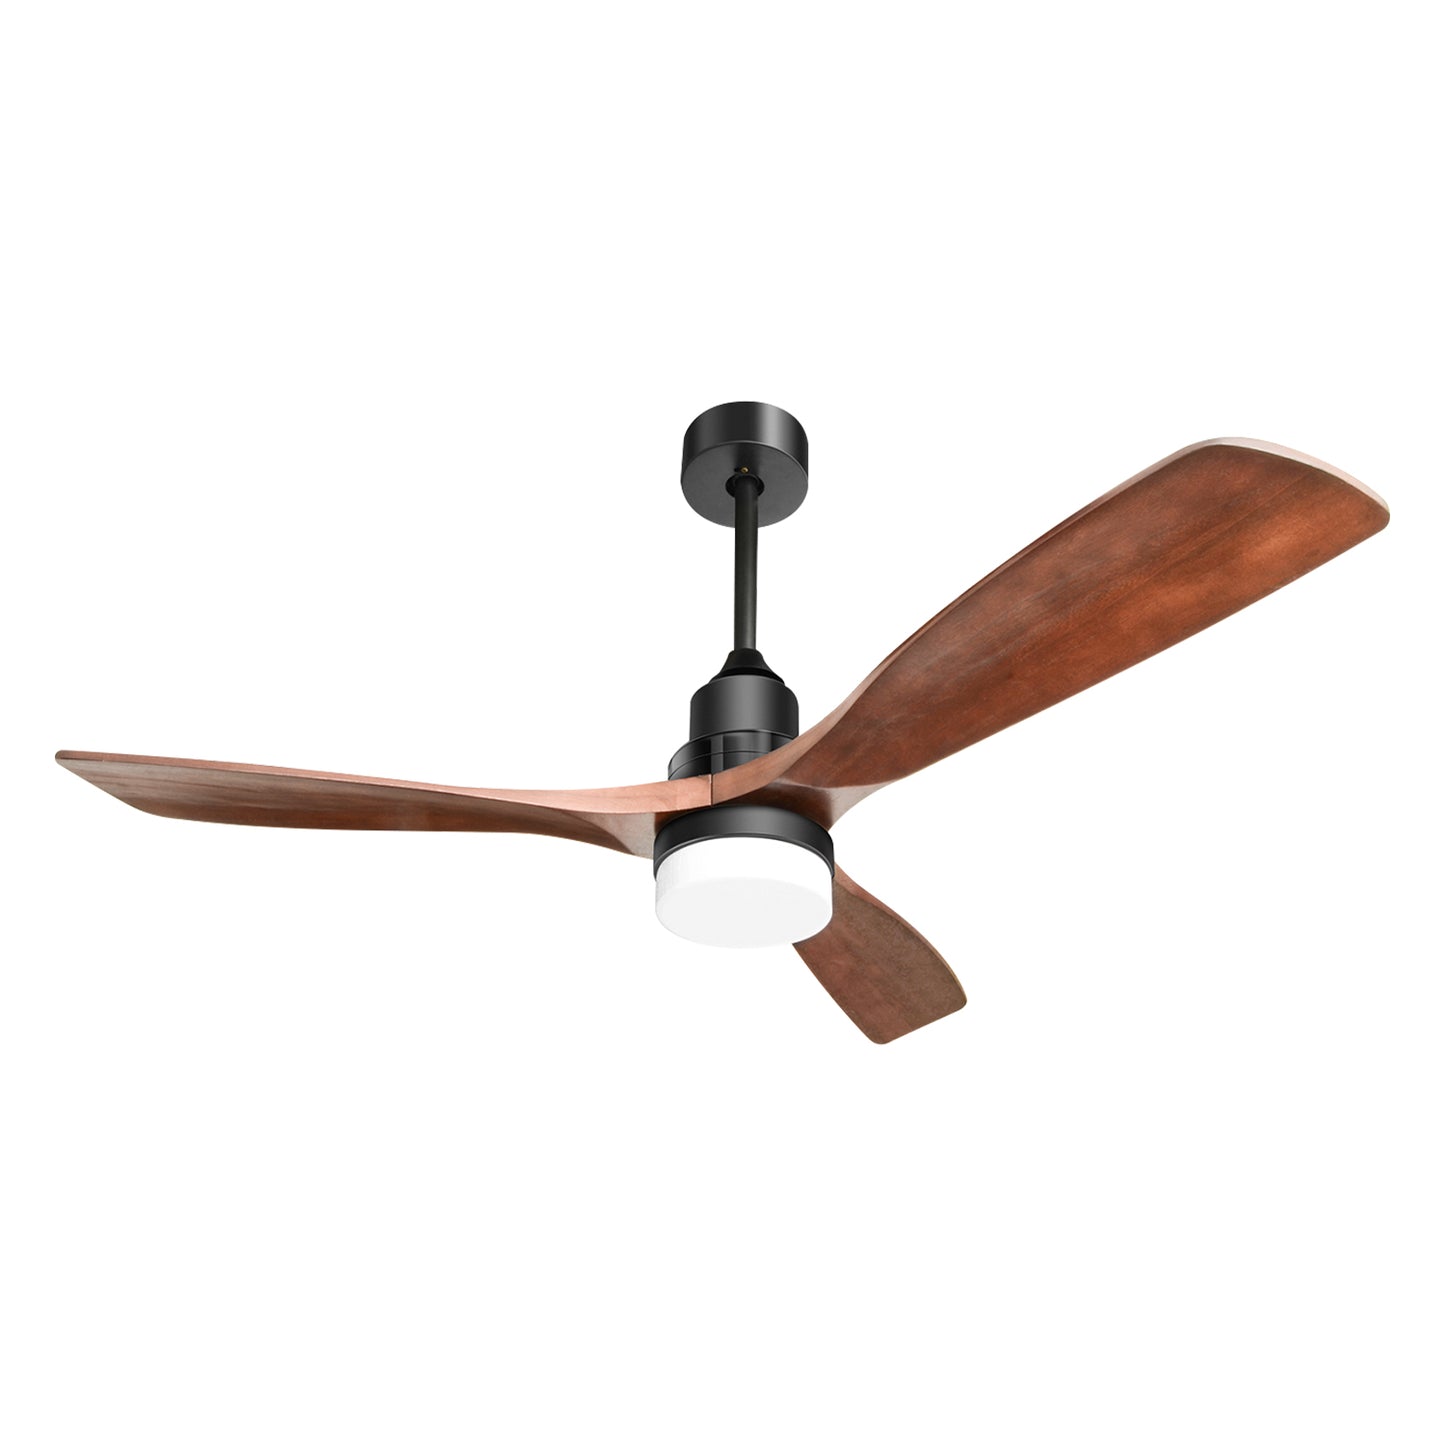 52-inch Modern Flush Ceiling Fans with Lights, 6 Speed Remote Control, Energy-Saving DC Motor, Natural Walnut Finish with 3 Wood Fan Blades